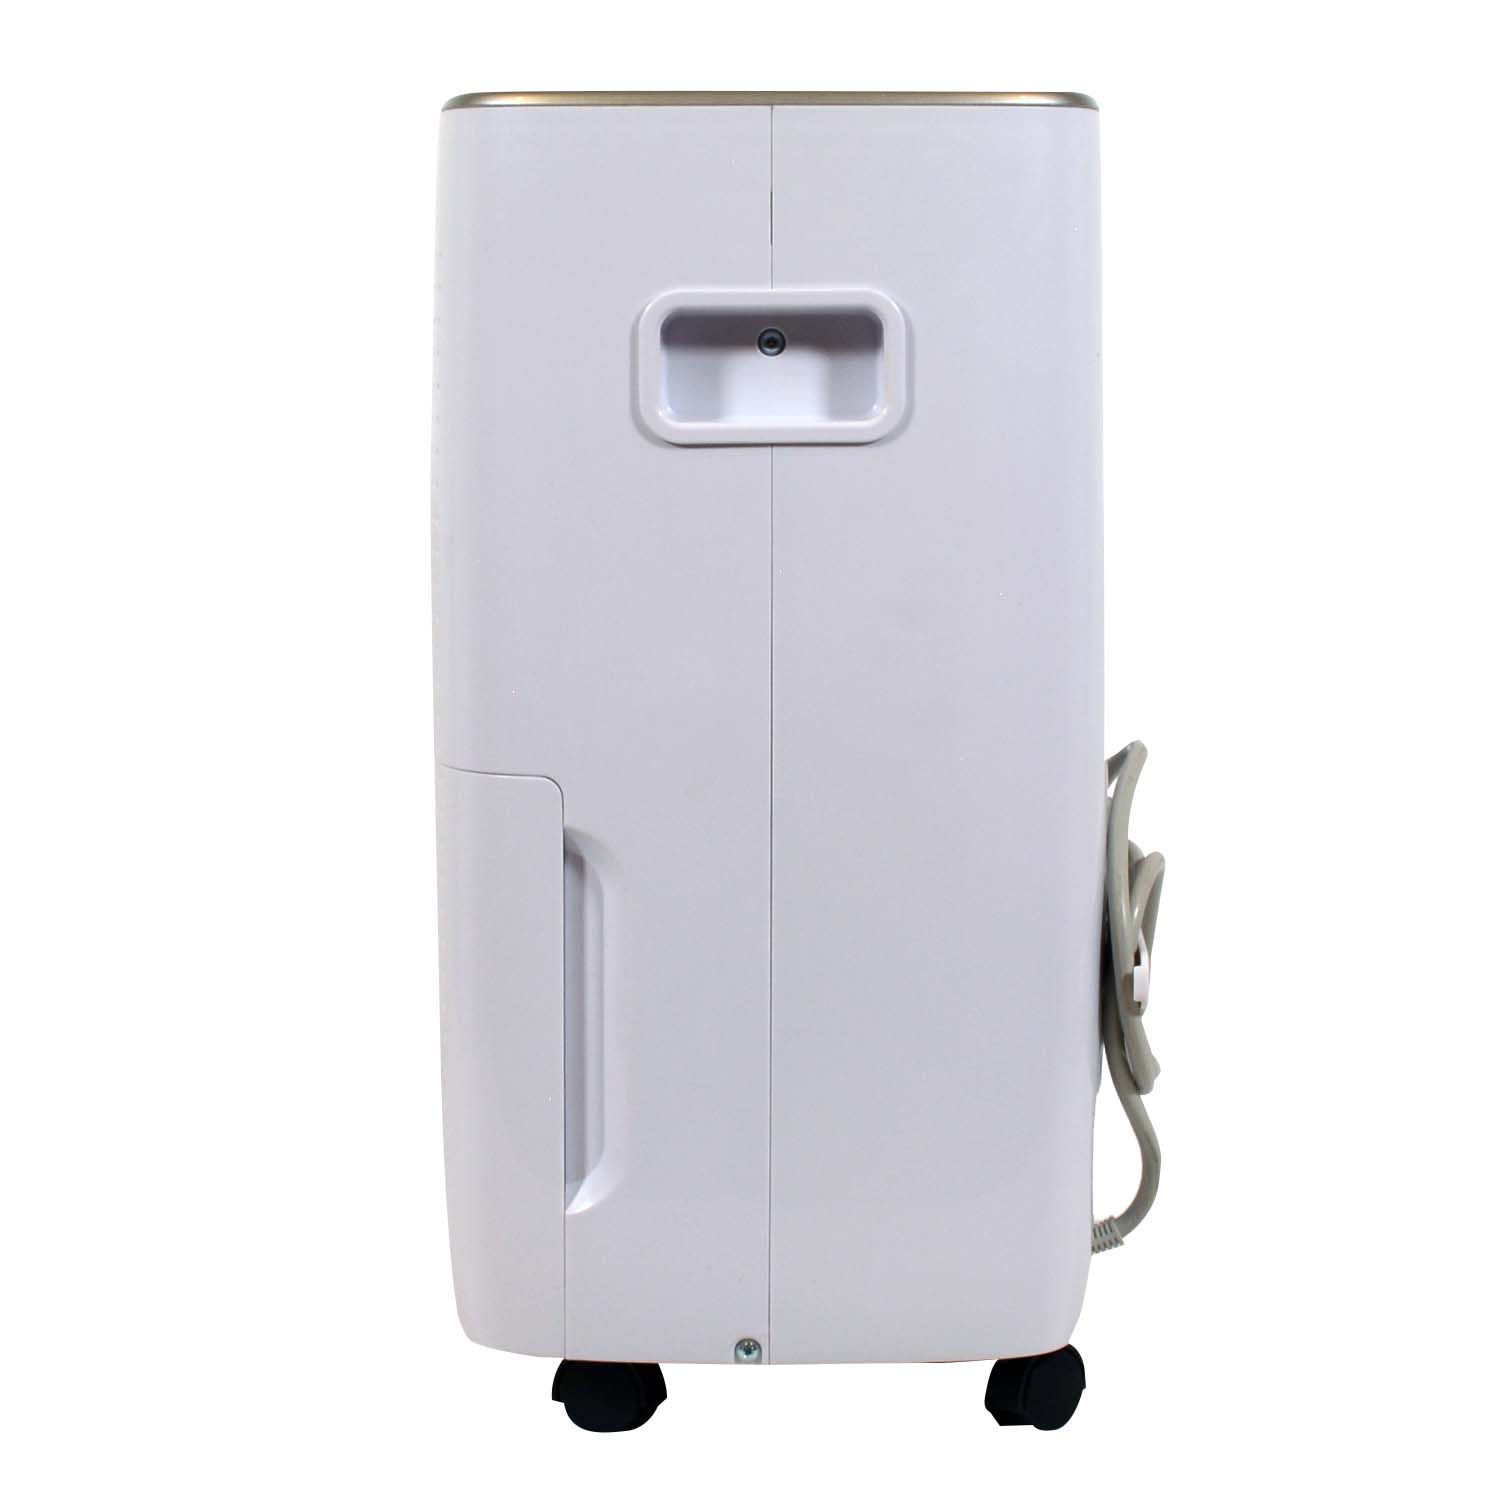 Soleus Air, Soleus Air DSJ-35E-01 Dehumidifier 35 Pint with Mirage Display Continuous Drainage Outlet 3.3 Amp New